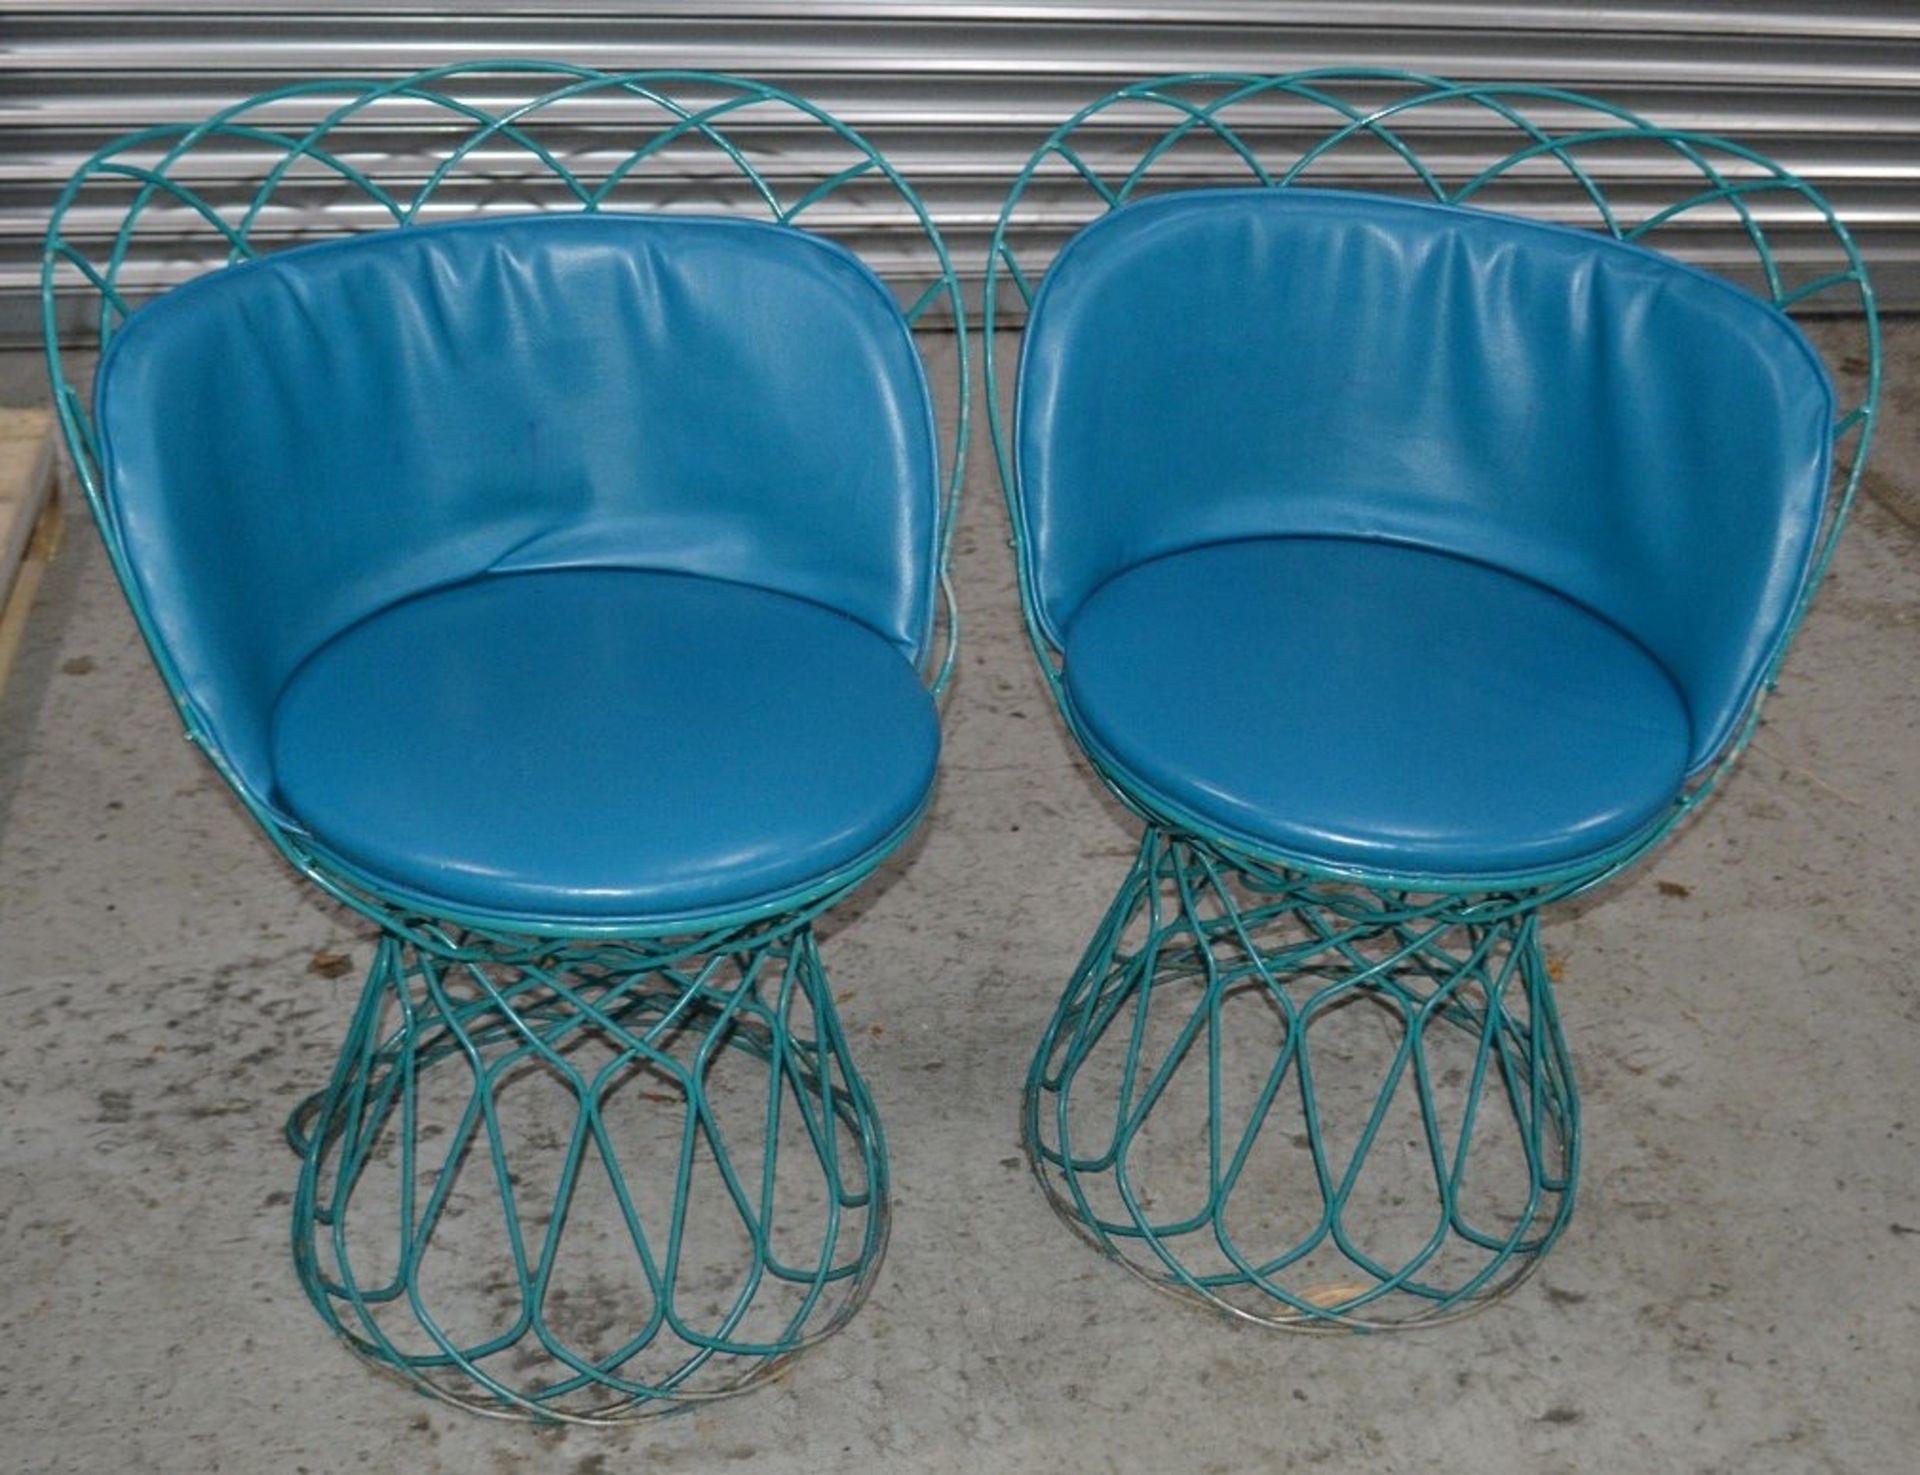 2 x Commercial Outdoor Wire Bistro Chairs With Padded Seats In Blue - Dimensions: H80 x W62 x D45cm